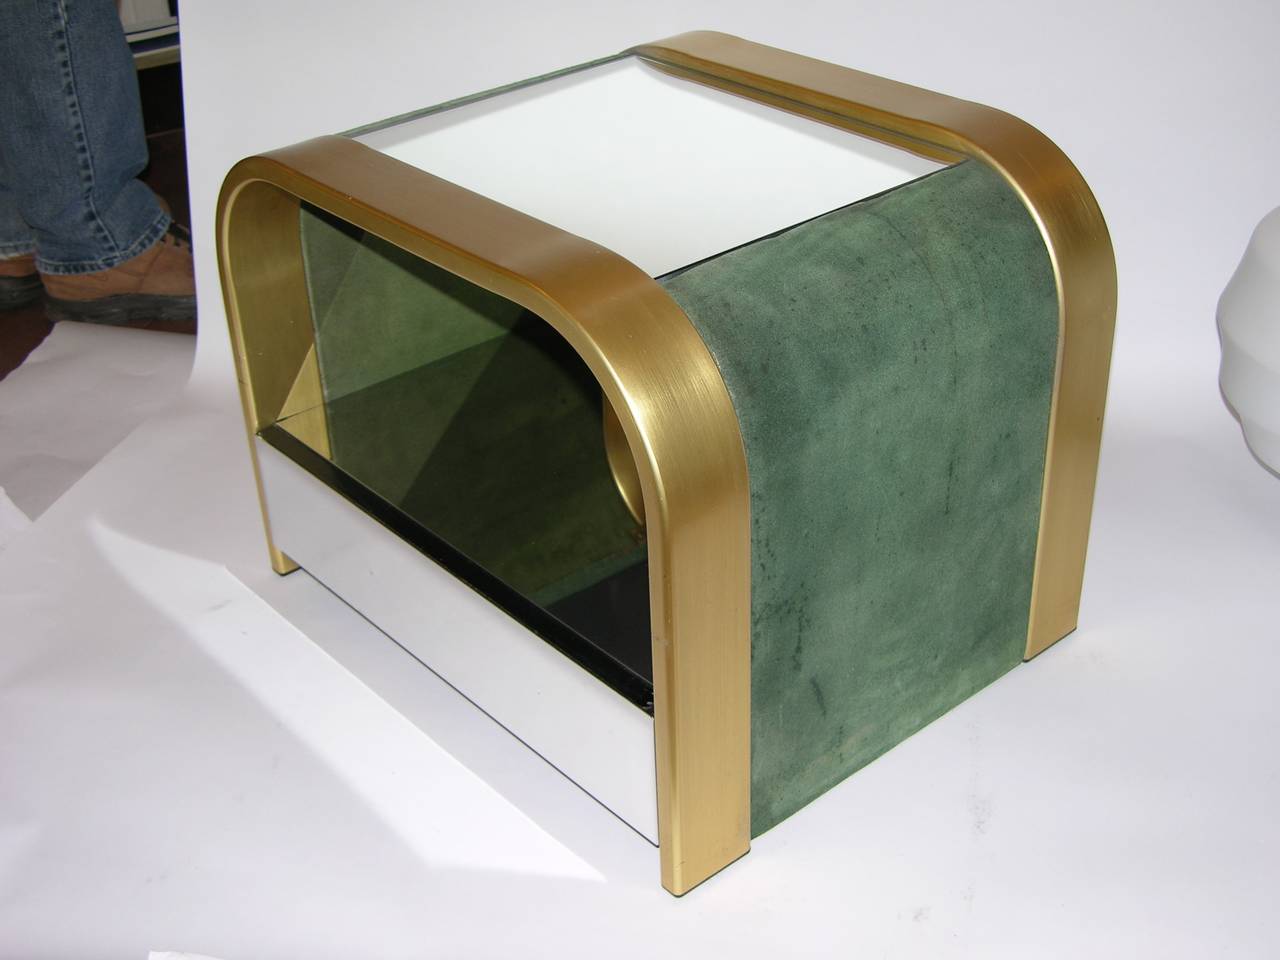 Unusual pair of open side tables by Romeo Rega, the rare curved design is accented with sophisticated use of different finishes: one drawer with chromed front under a mirrored shelf in the brass edged structure highlighted with a mirrored top and